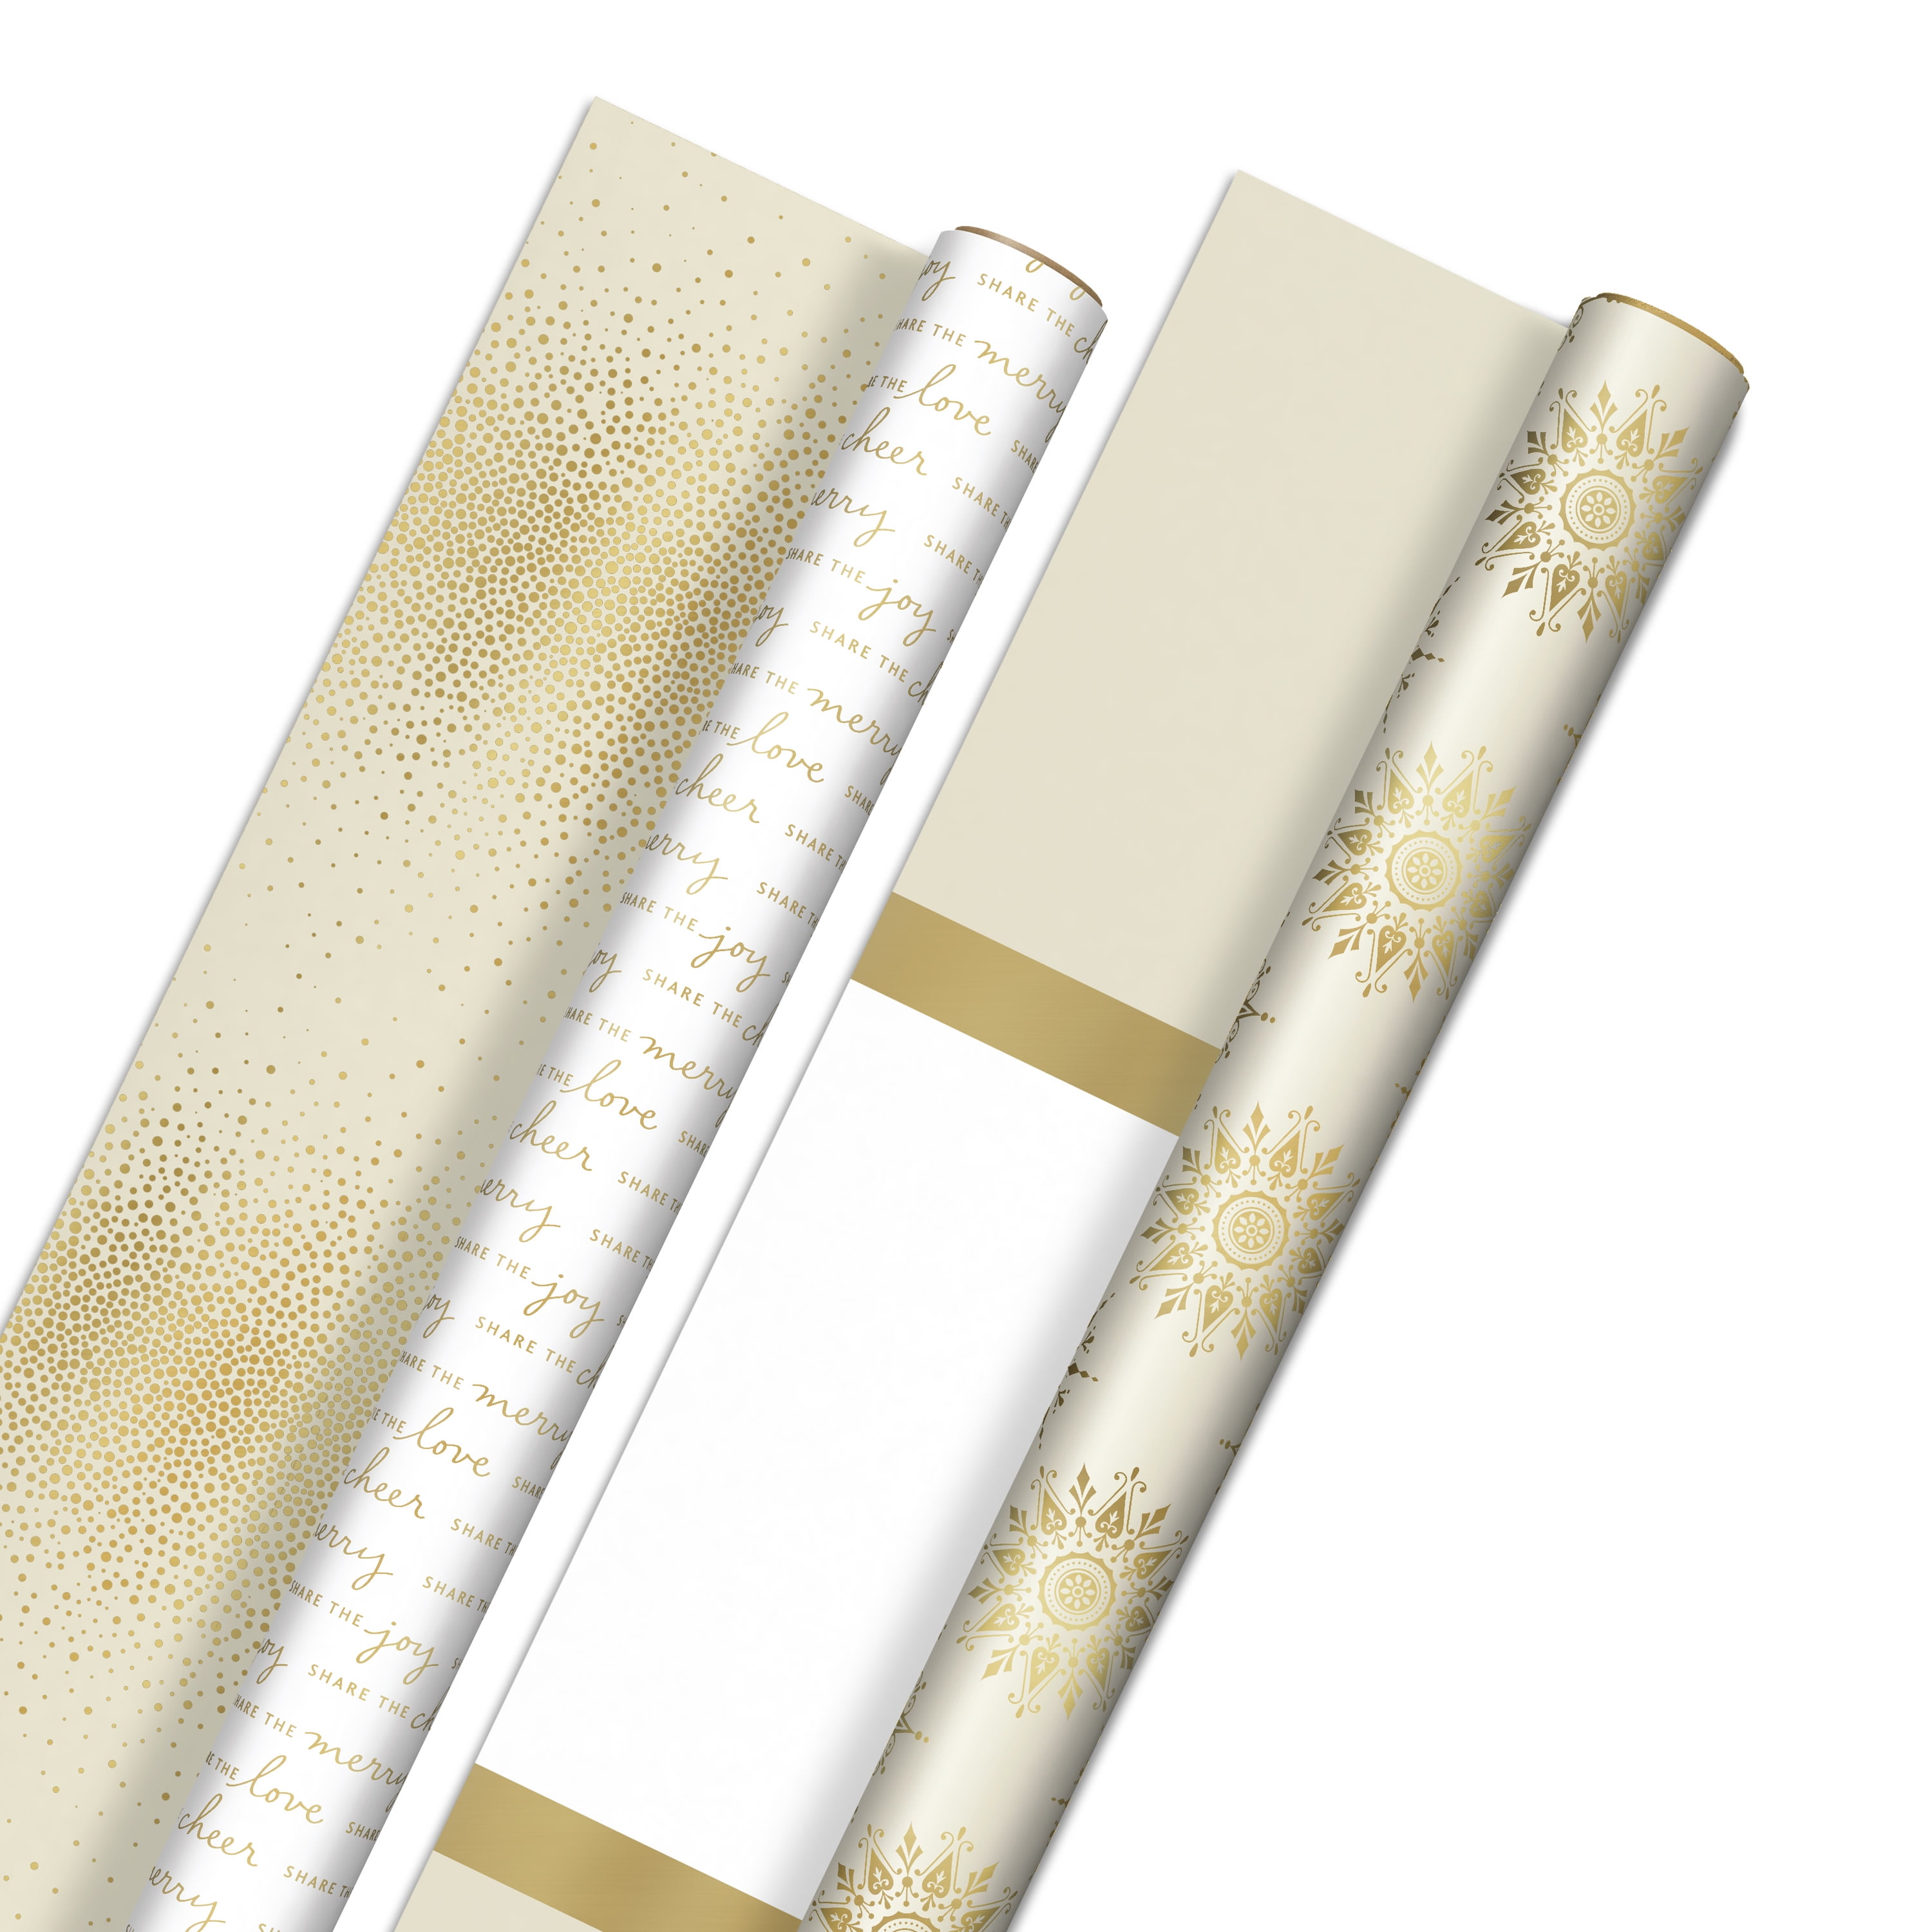 Hallmark Reversible White and Gold Wrapping Paper - Bulk (2 Jumbo Rolls:  160 sq. ft. ttl) Share the Joy, Cheer, Merry, Love, Stripes, Dots